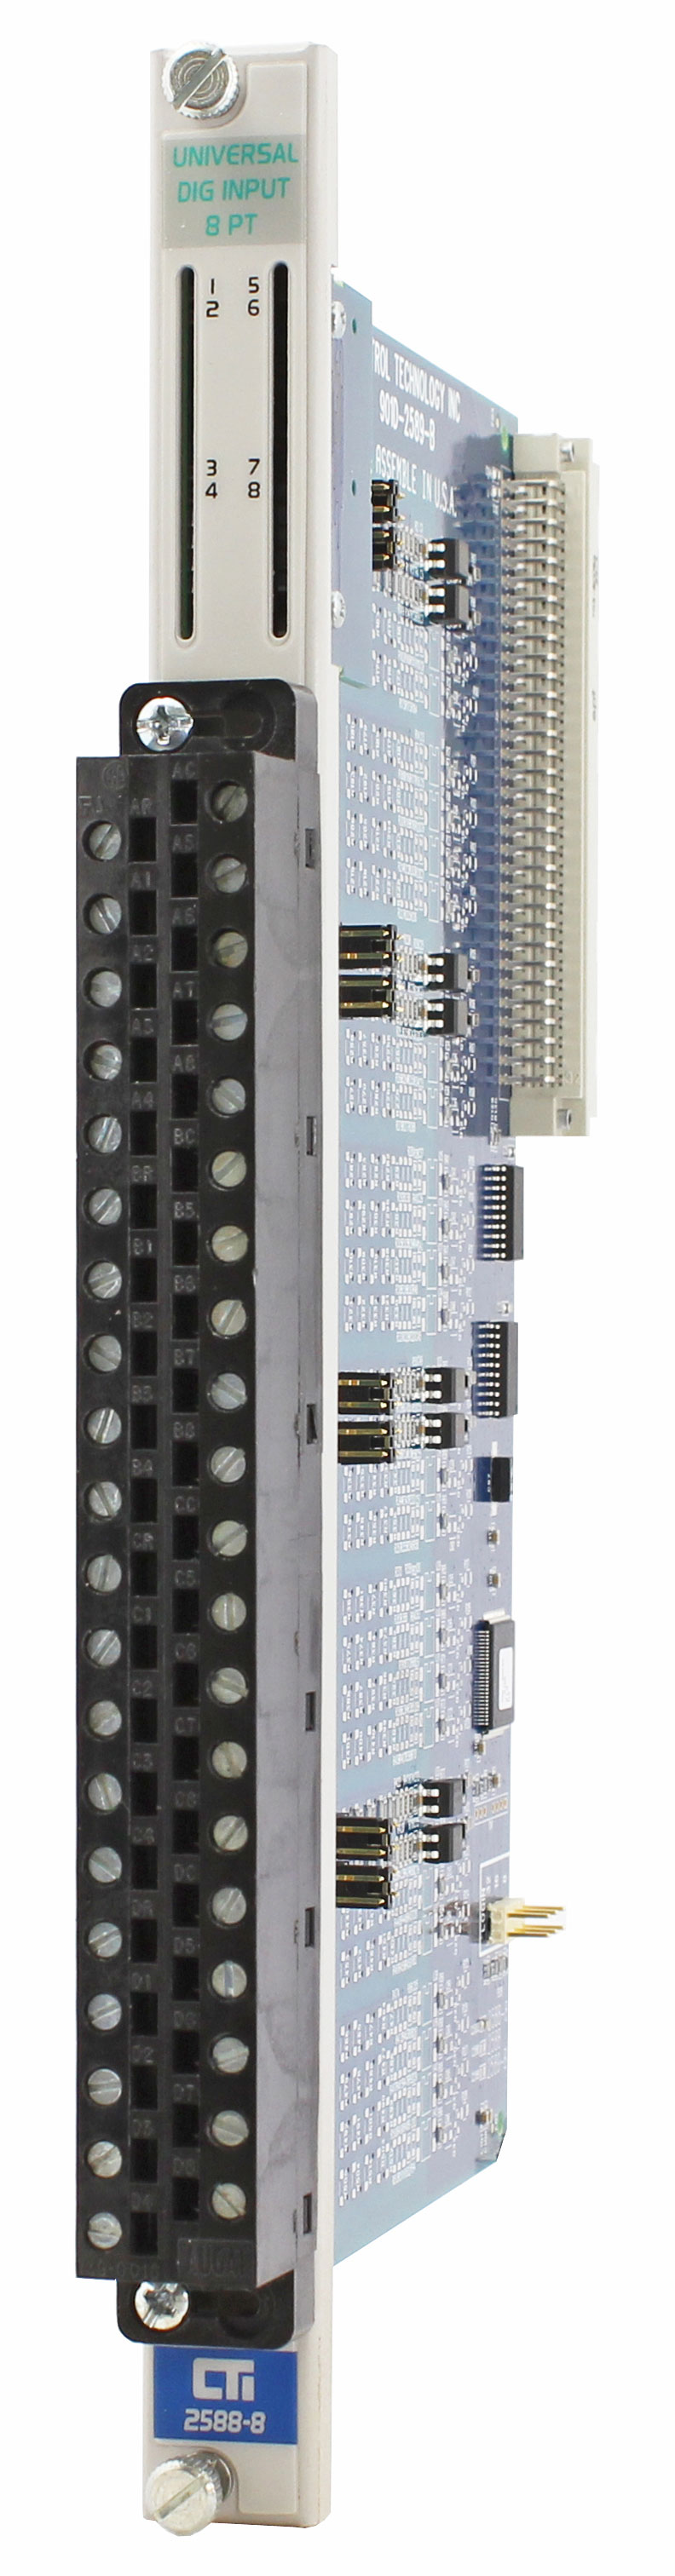 2588-8 8-Point Universal Discrete Input Module (MATURED - replaced by 2589-B)